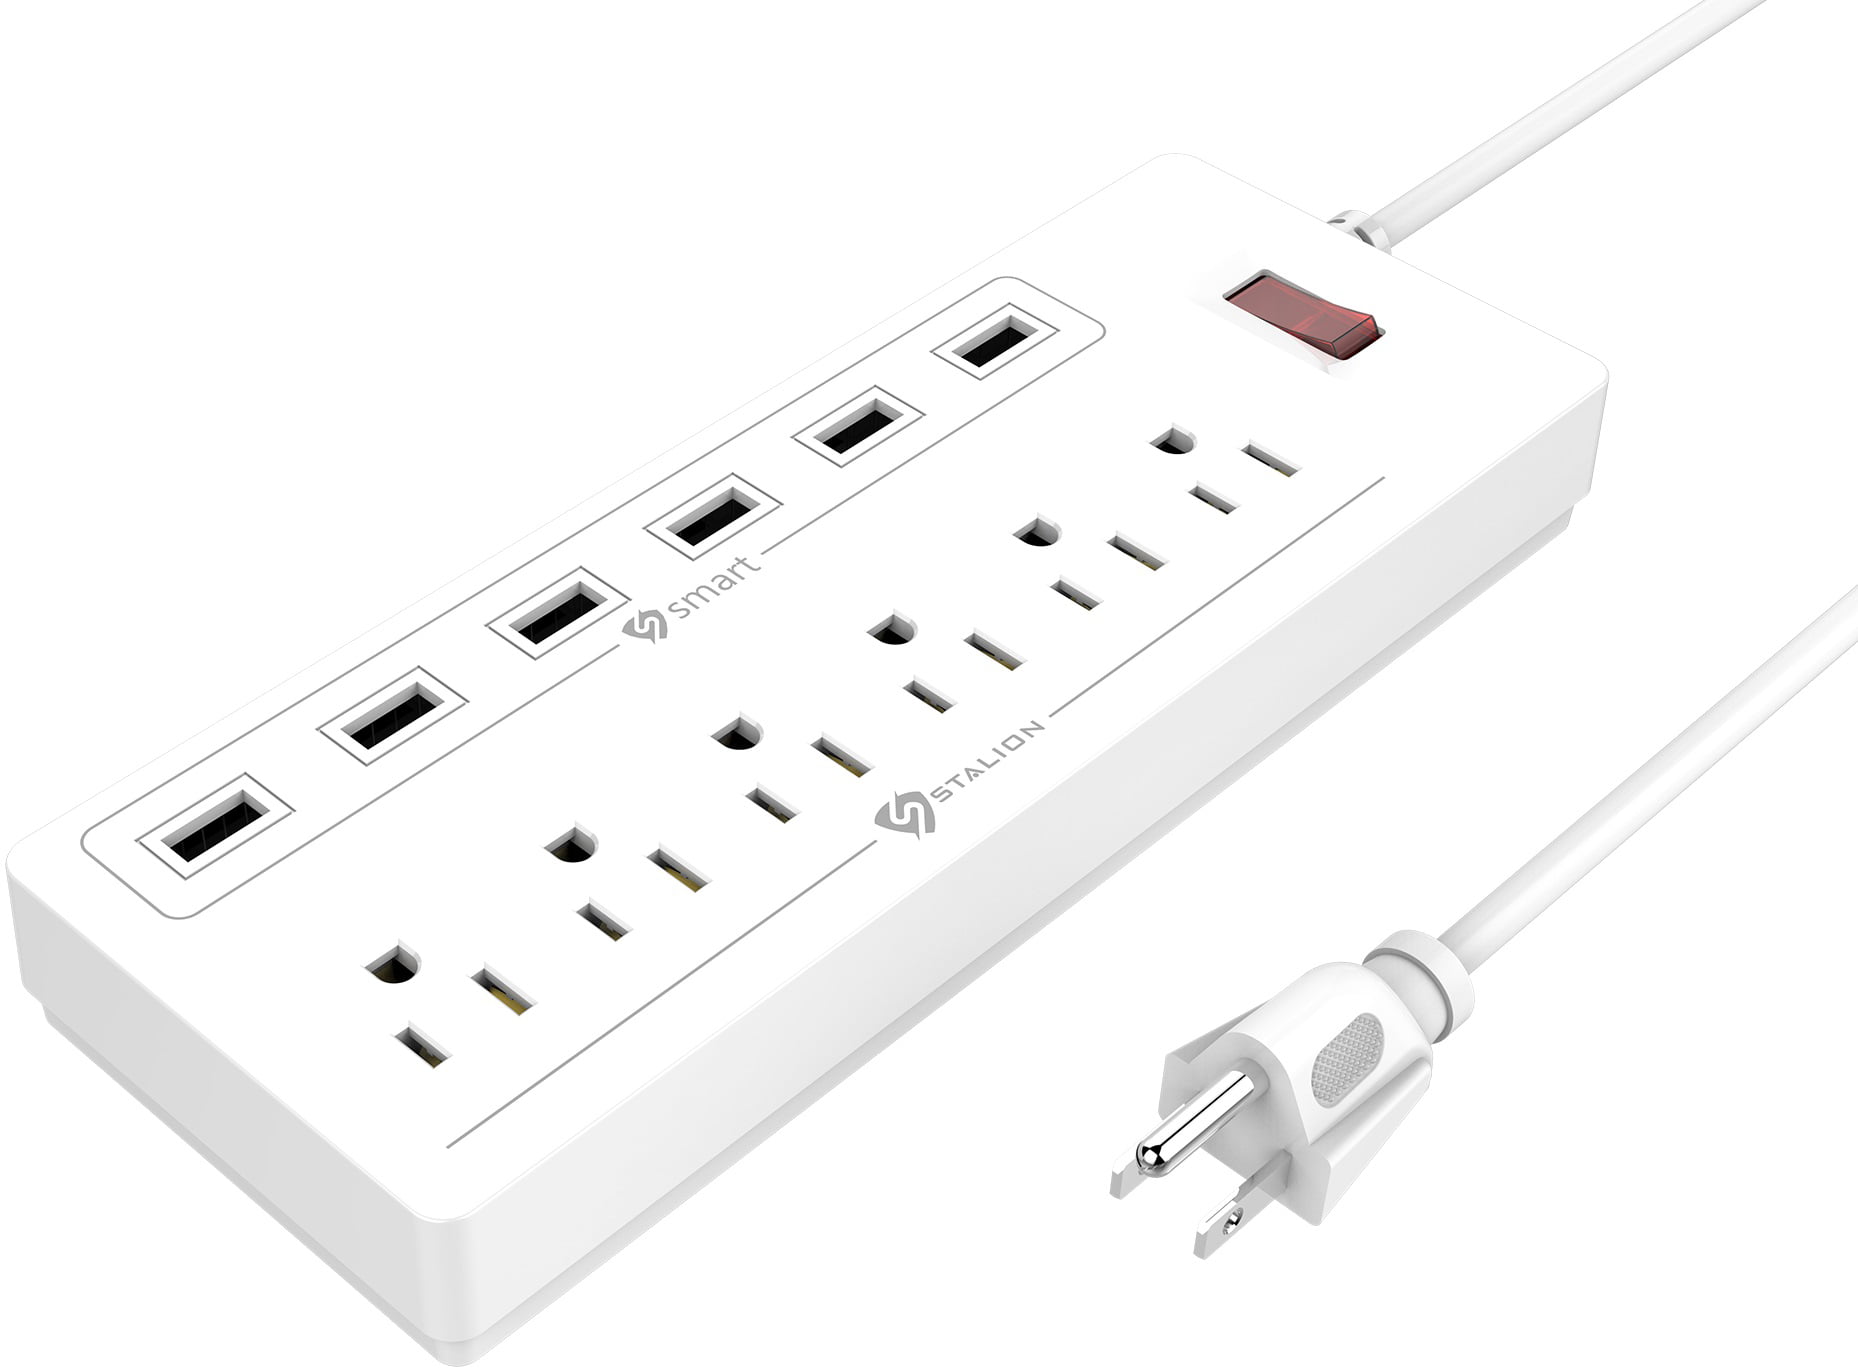 New Poweradd 6 USB Charging Ports & 6 Outlet Surge Protector Power Strip Socket 